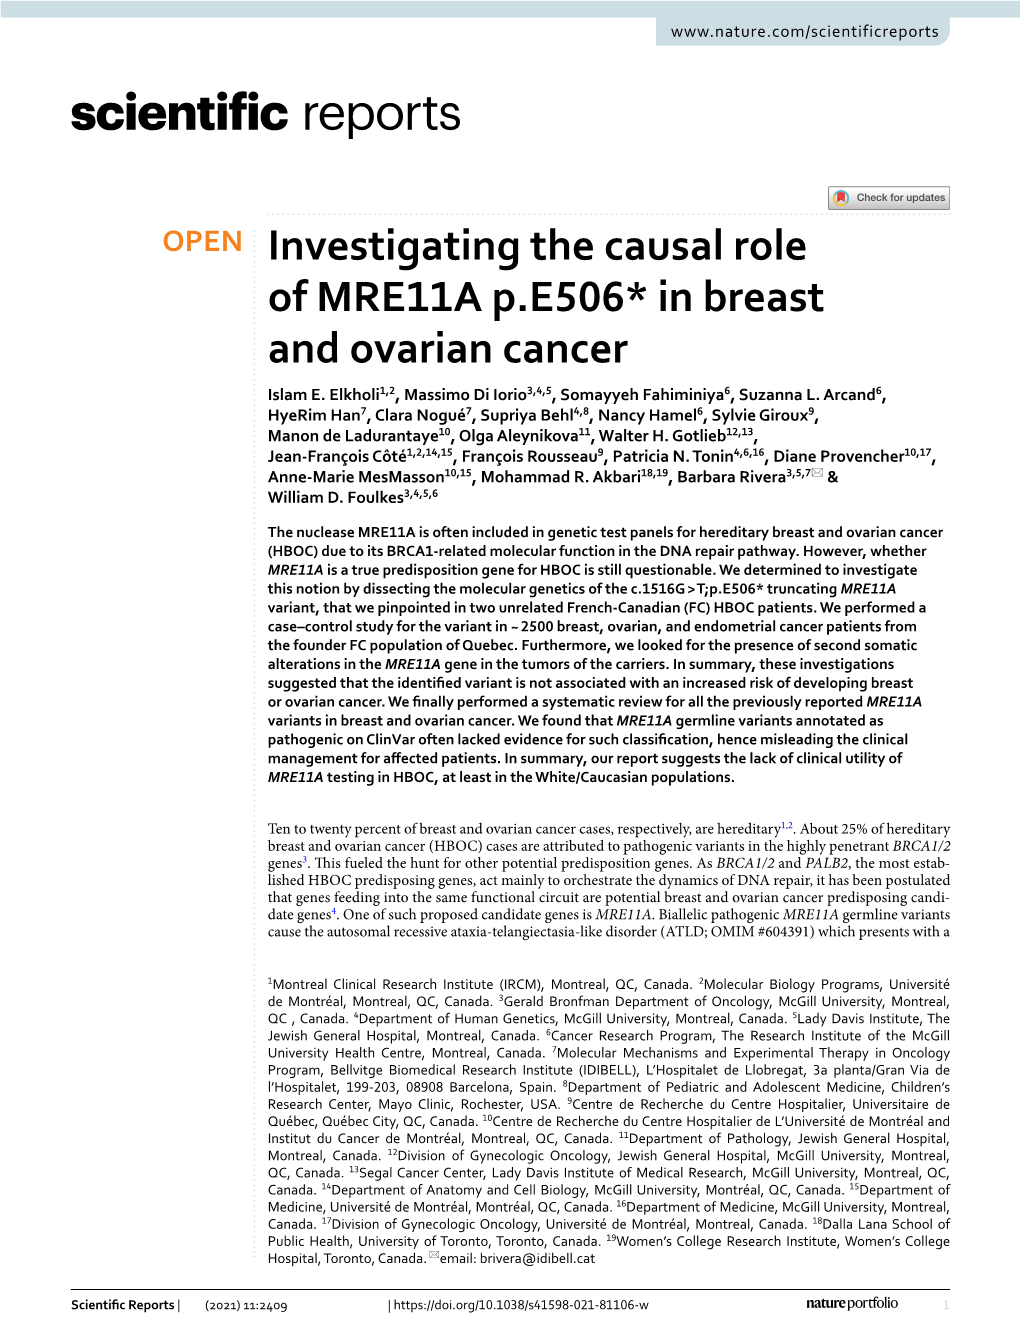 Investigating the Causal Role of MRE11A P.E506* in Breast and Ovarian Cancer Islam E